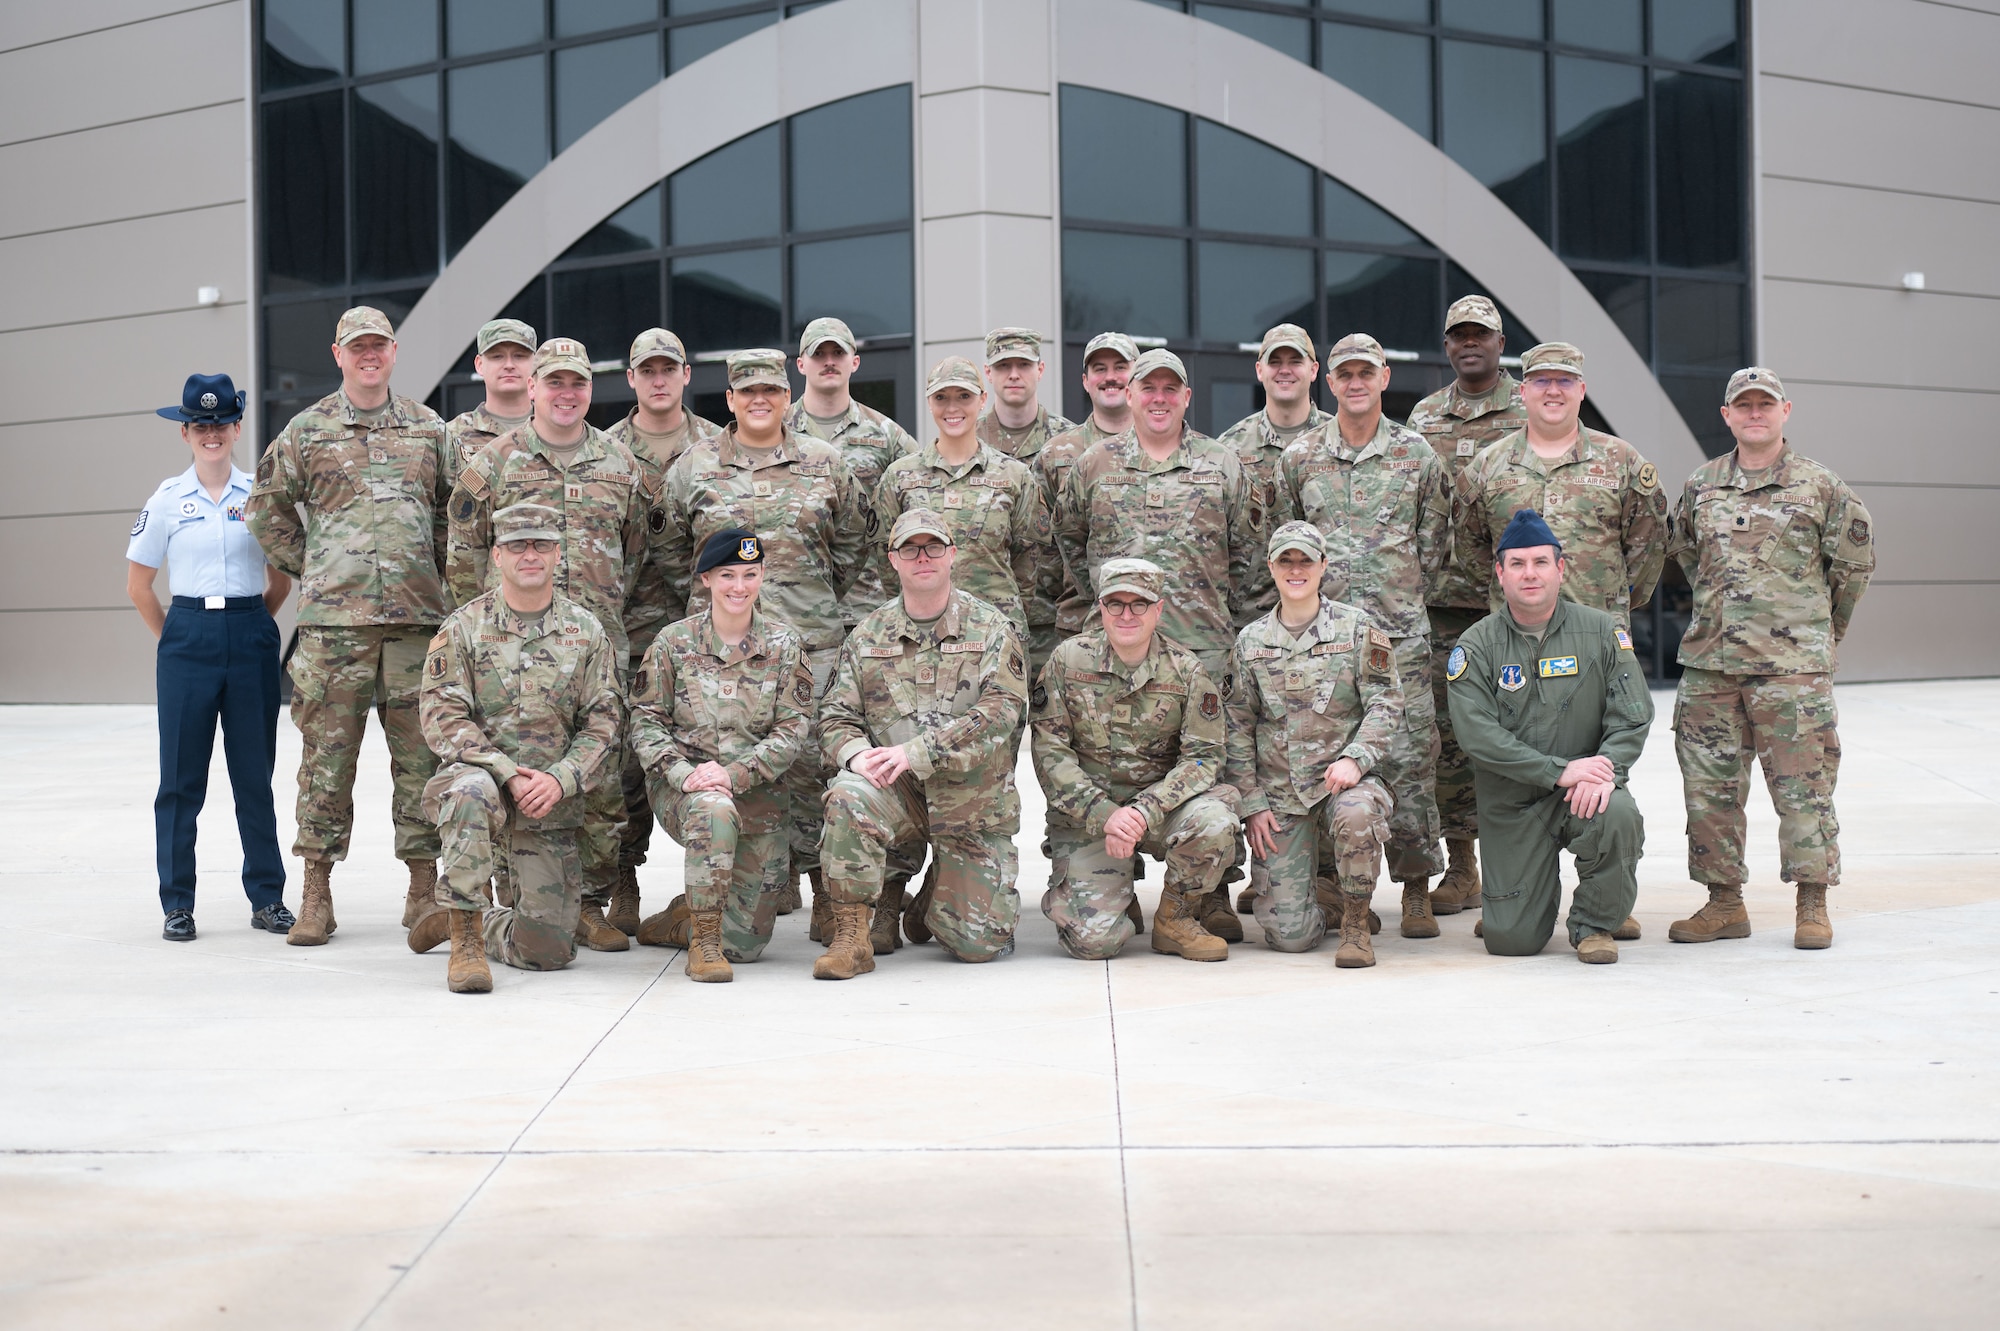 Guardsmen from New Hampshire pose for a photo at BMT